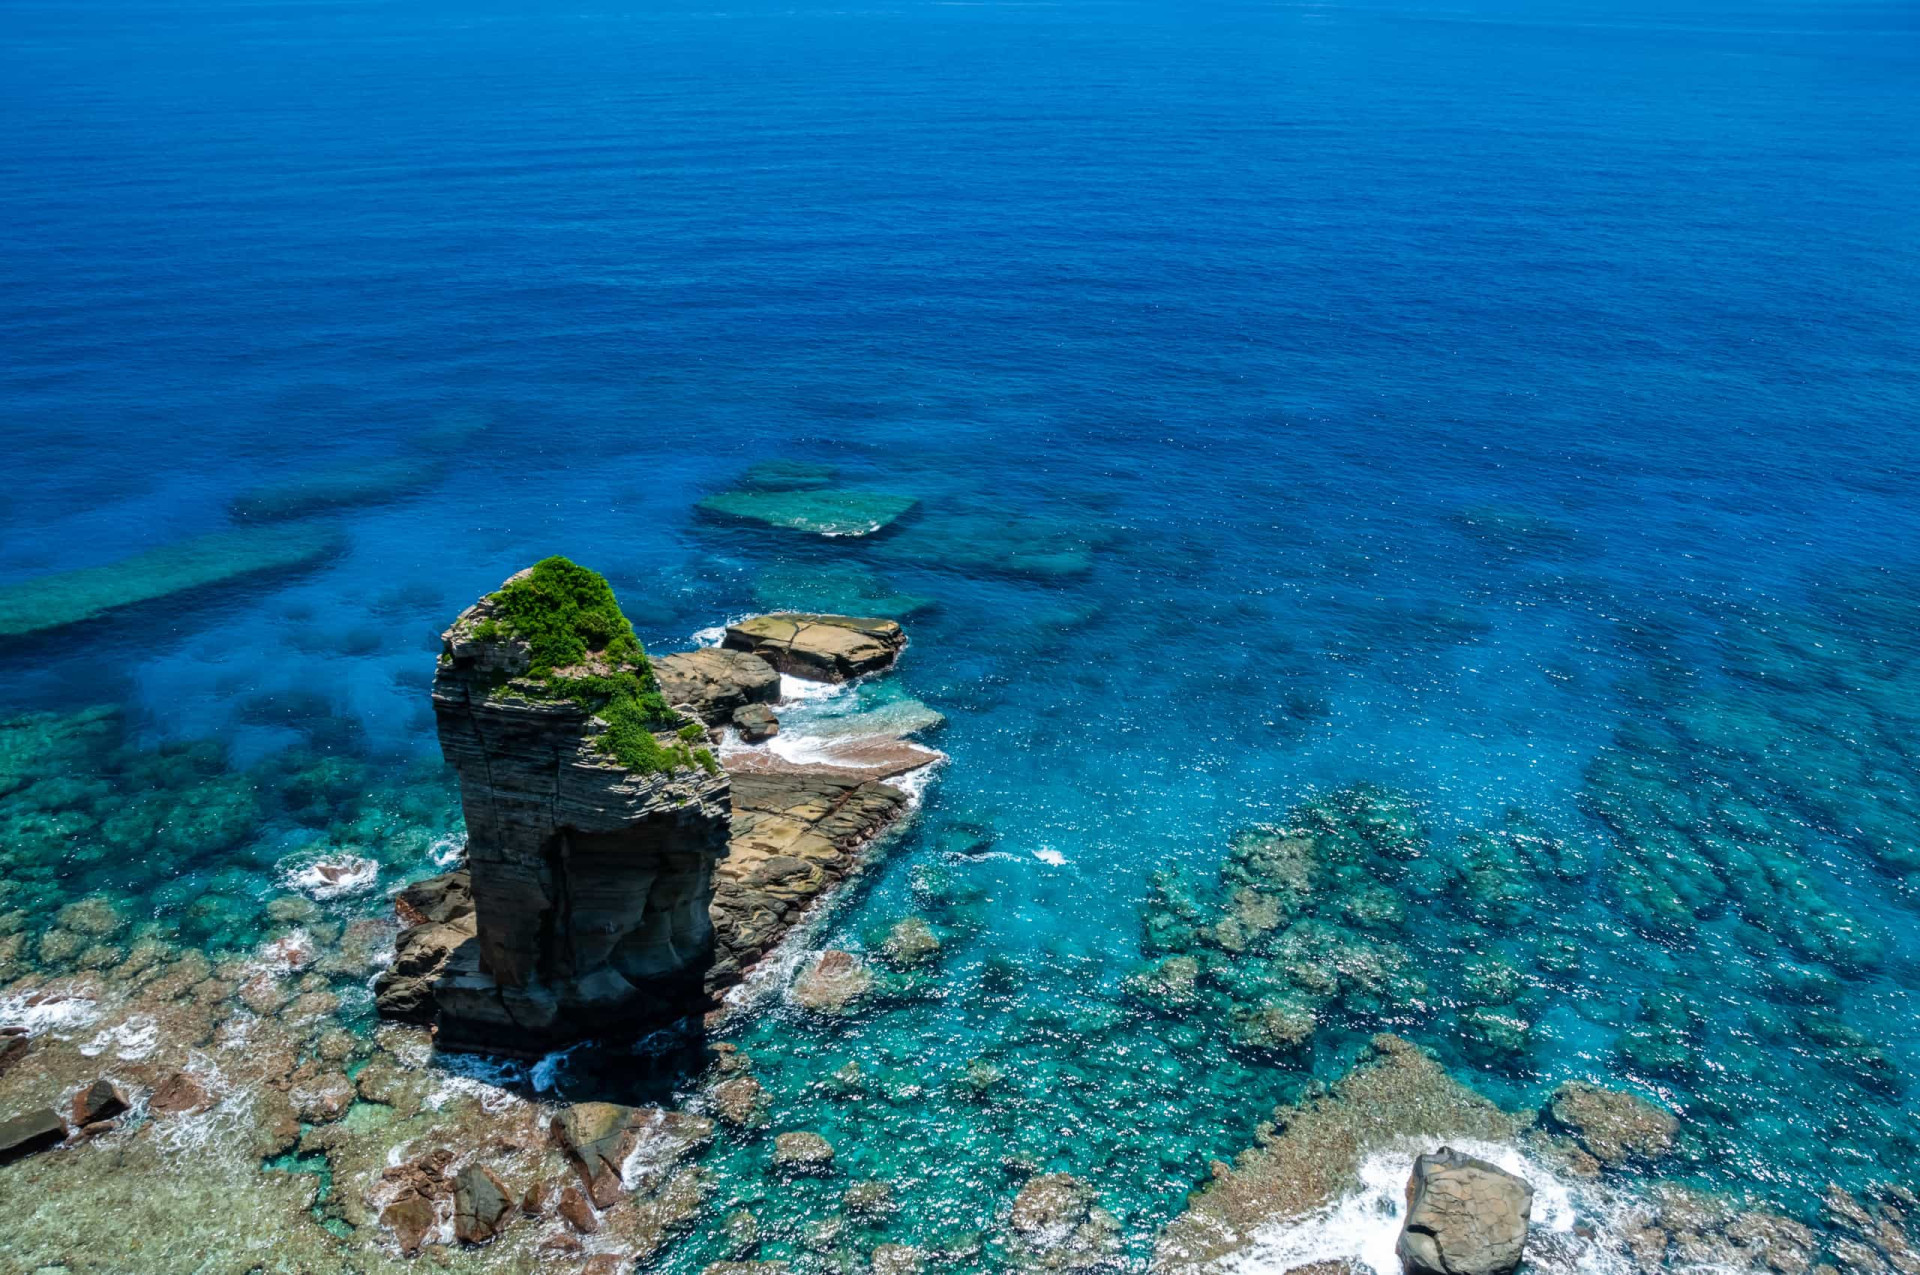 <p>Located off the coast of Yonaguni, the southernmost of the Ryukyu Islands, this formation has been the subject of much speculation.</p><p><a href="https://www.msn.com/en-sg/community/channel/vid-7xx8mnucu55yw63we9va2gwr7uihbxwc68fxqp25x6tg4ftibpra?cvid=94631541bc0f4f89bfd59158d696ad7e">Follow us and access great exclusive content every day</a></p>